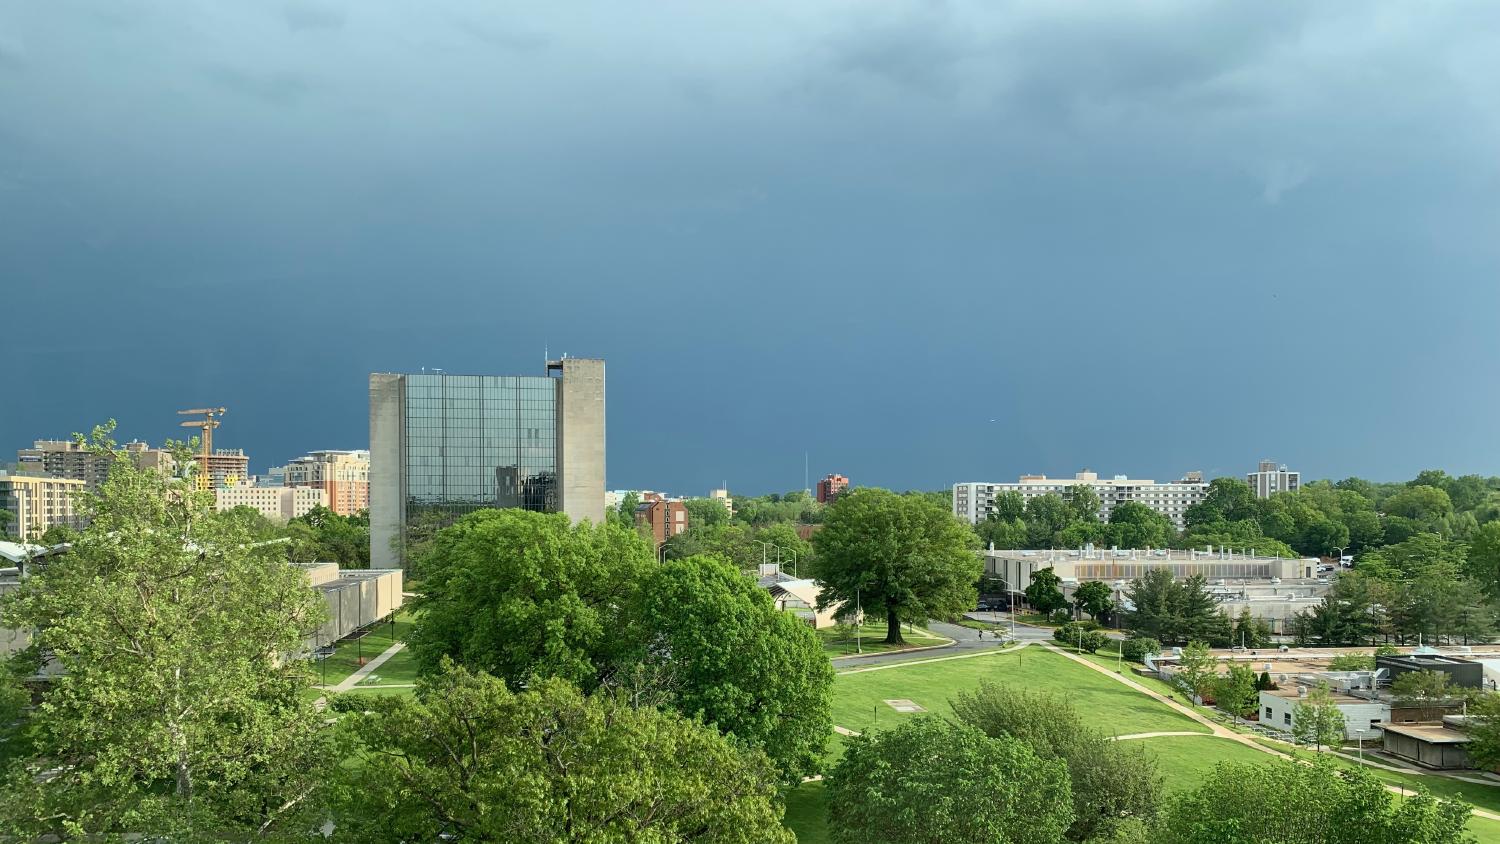 View from the NIH campus towards Bethesda